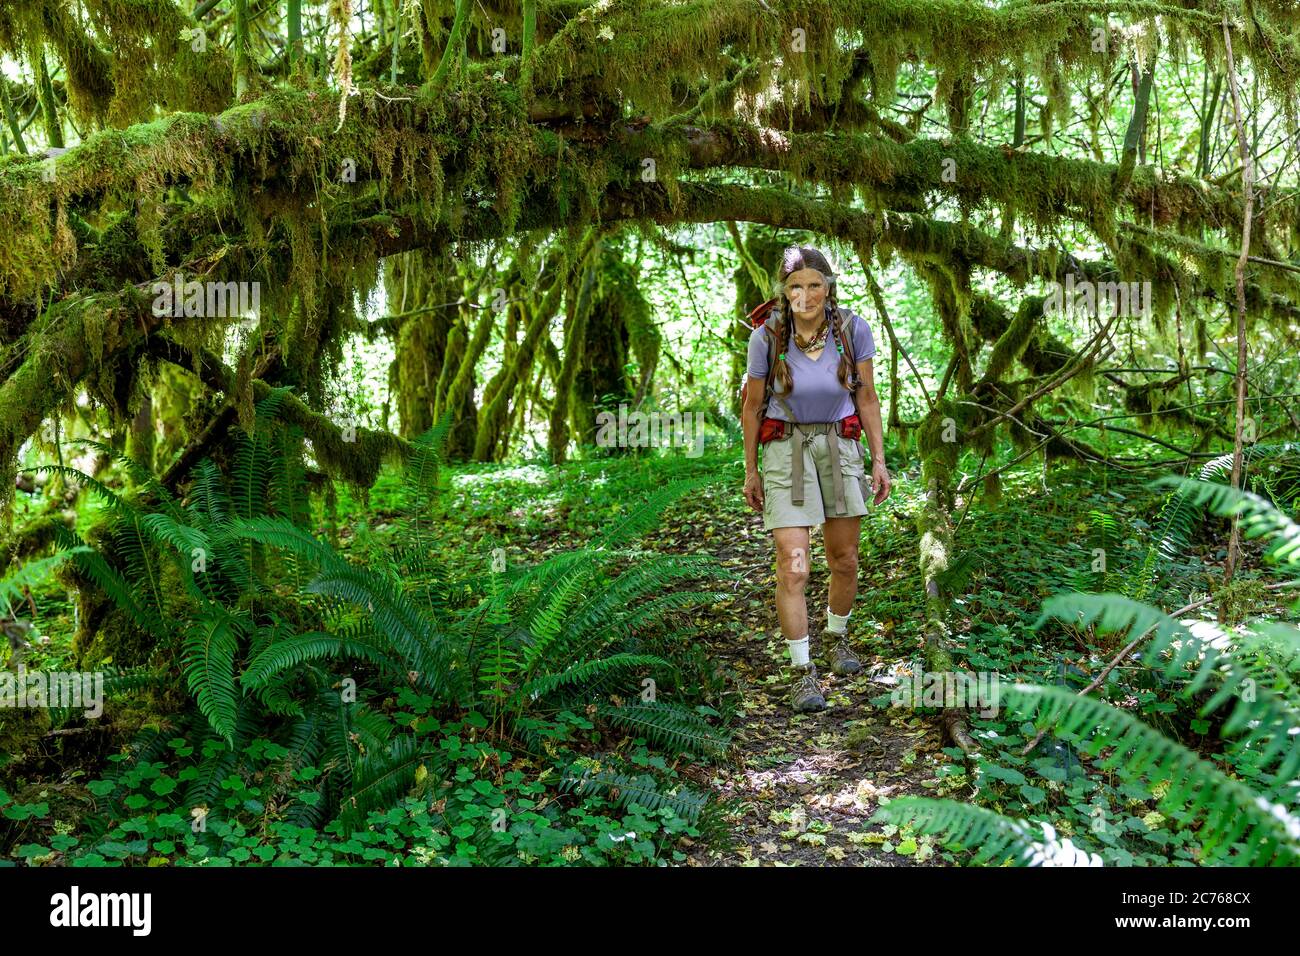 WA17472-00....WASHINGTON - Vicky Spring hiking along the Hoh River Trail in Olympic National Park. Stock Photo